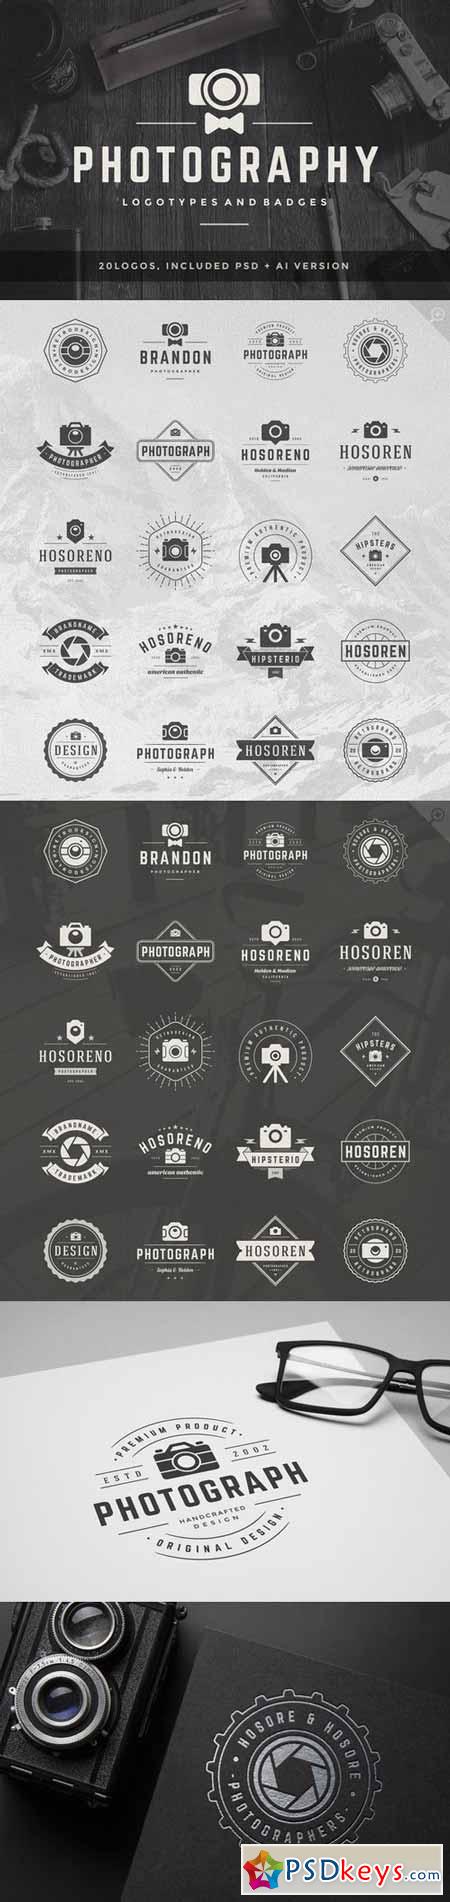 20 Photography logos and badges 362199